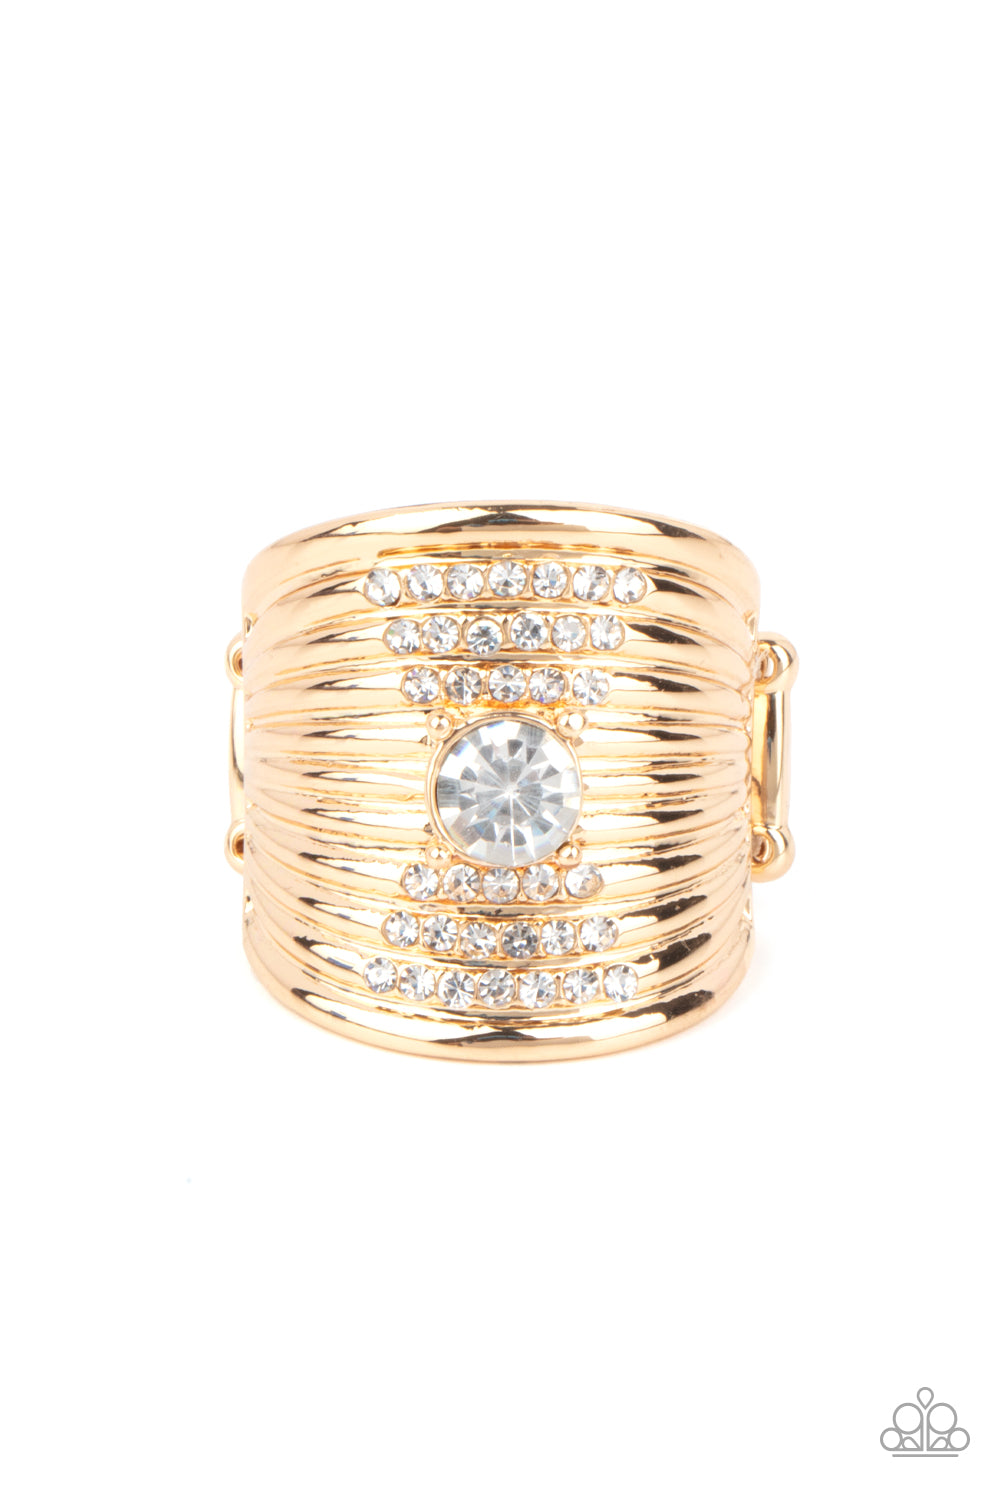 Ribbed with faux layered bands, a thick gold plate is encrusted in dainty white rhinestones. A solitaire white rhinestone embellishes the center, creating a sparkly statement piece atop the finger. Features a stretchy band for a flexible fit.  Sold as one individual ring.